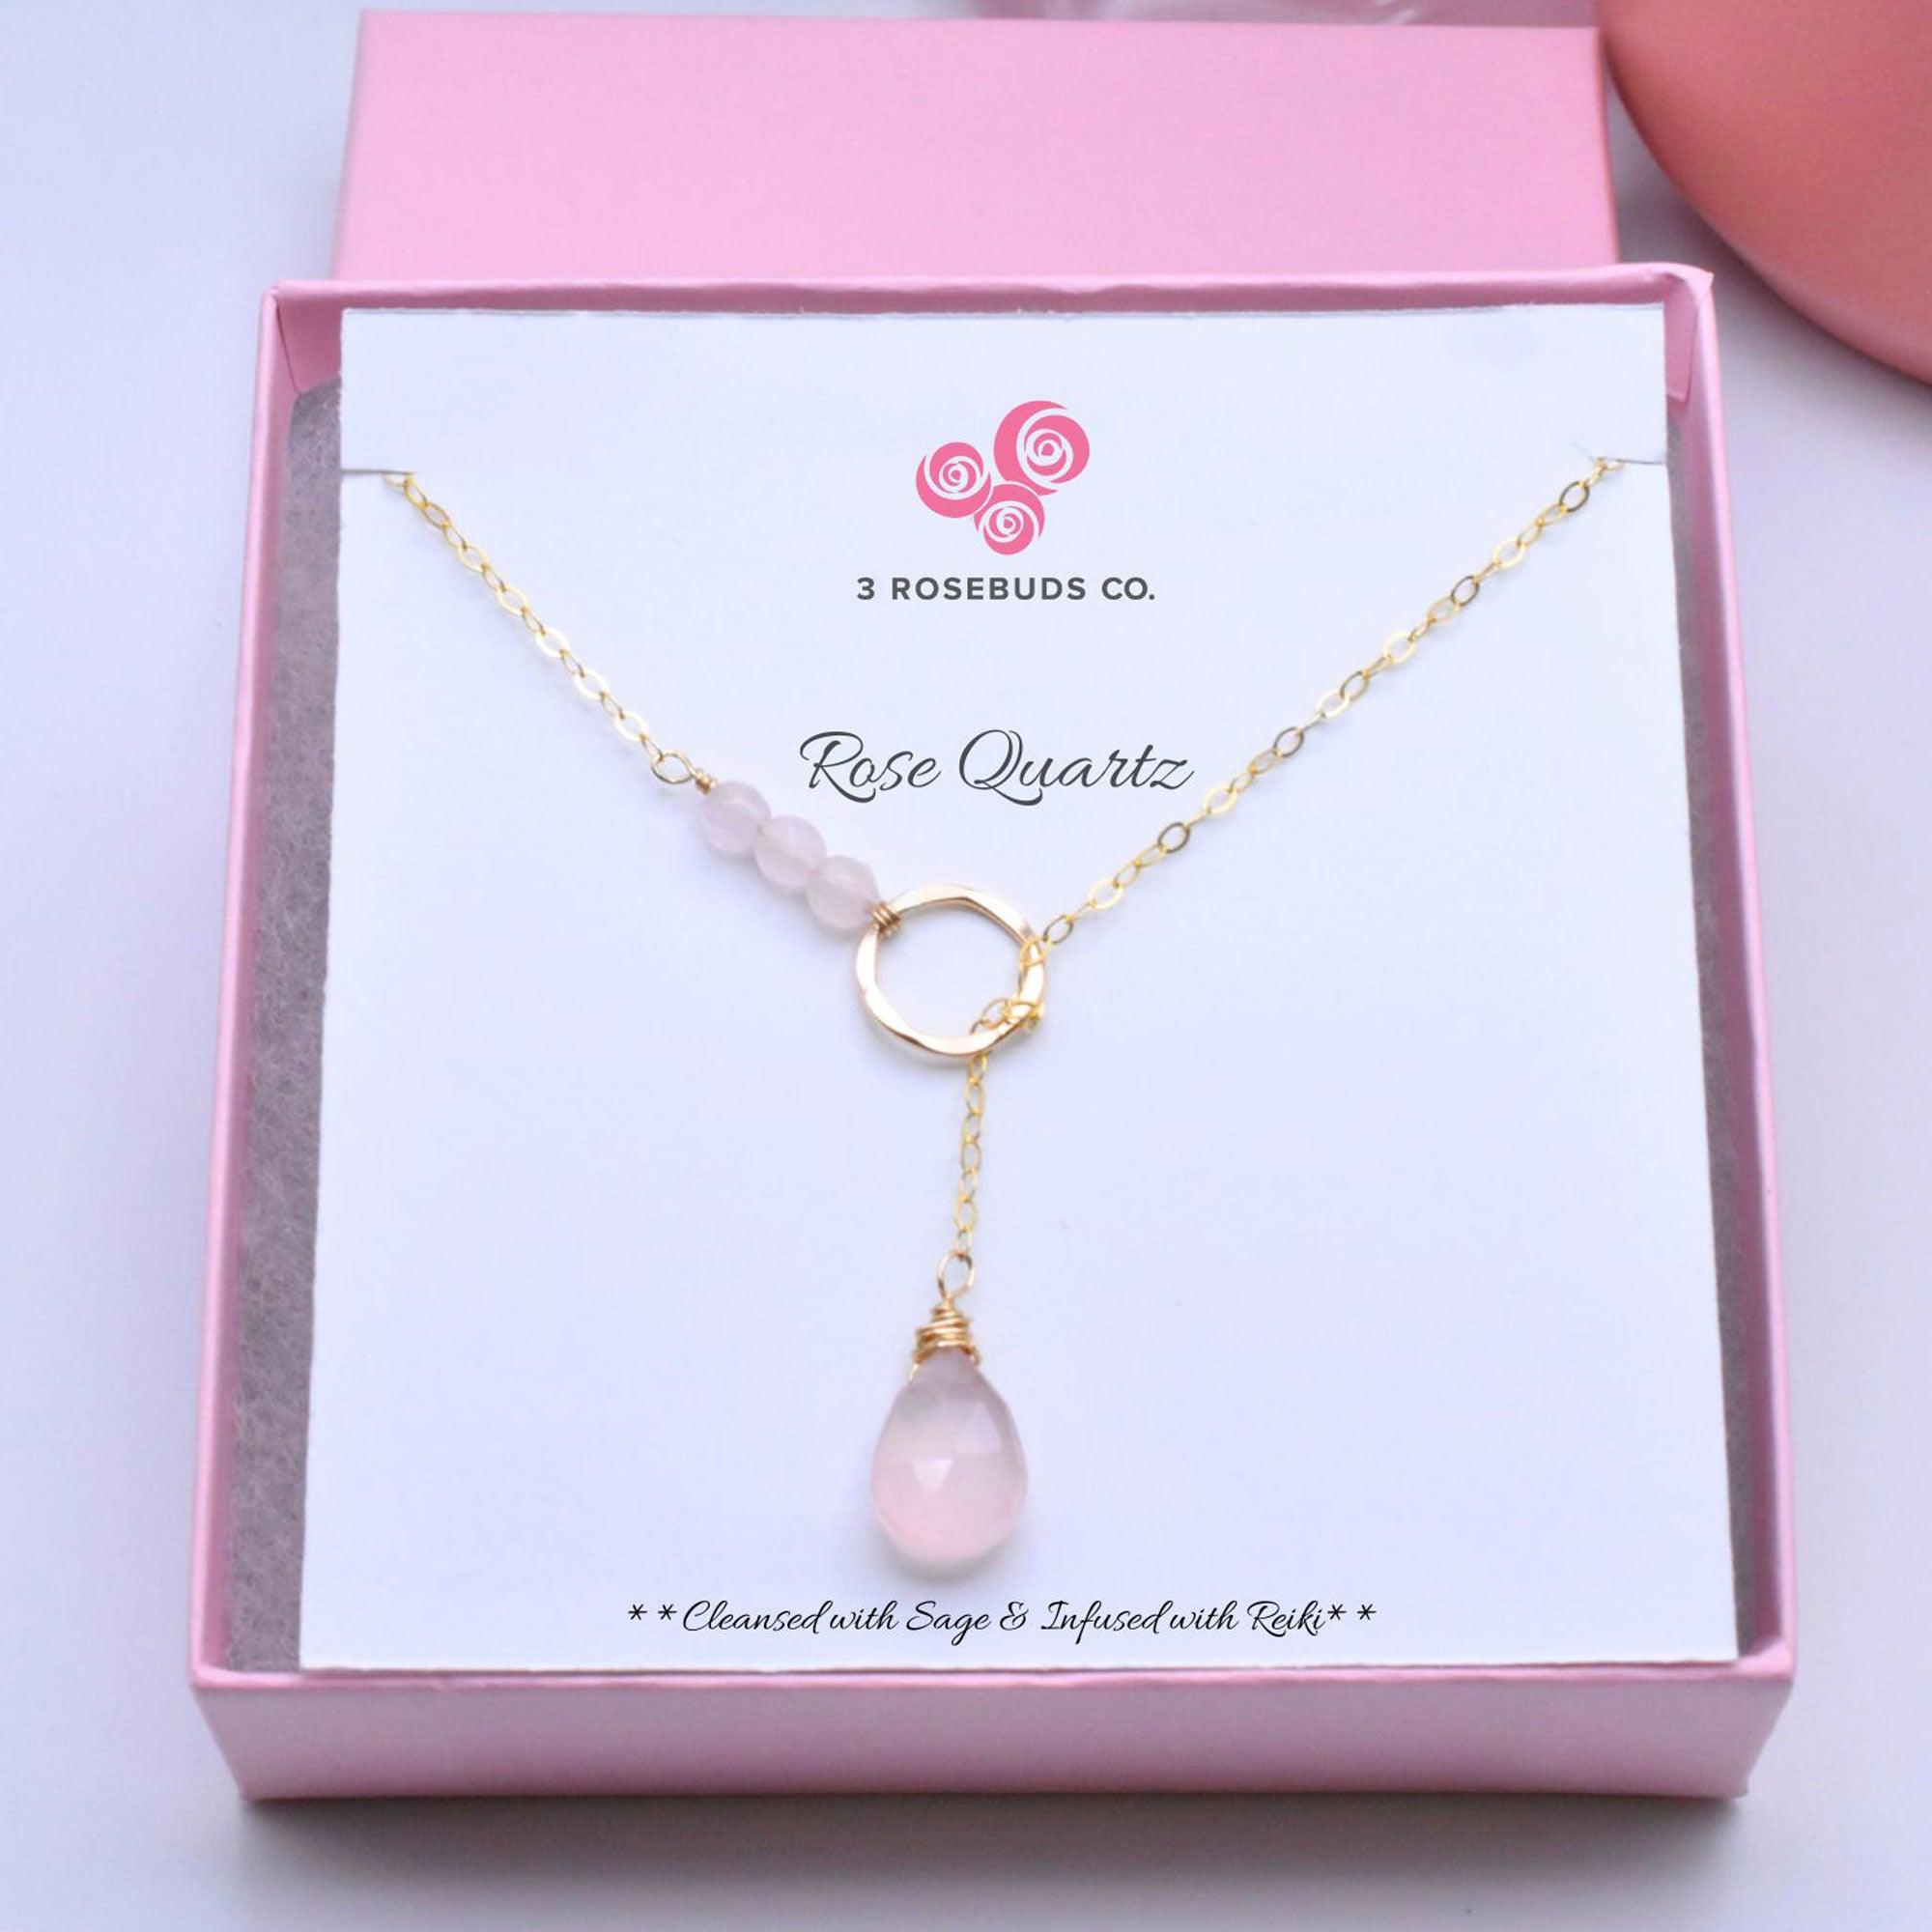 Rose Quartz 14k Gold Filled Necklace. Heart Chakra Healing necklace to help welcome new love. 